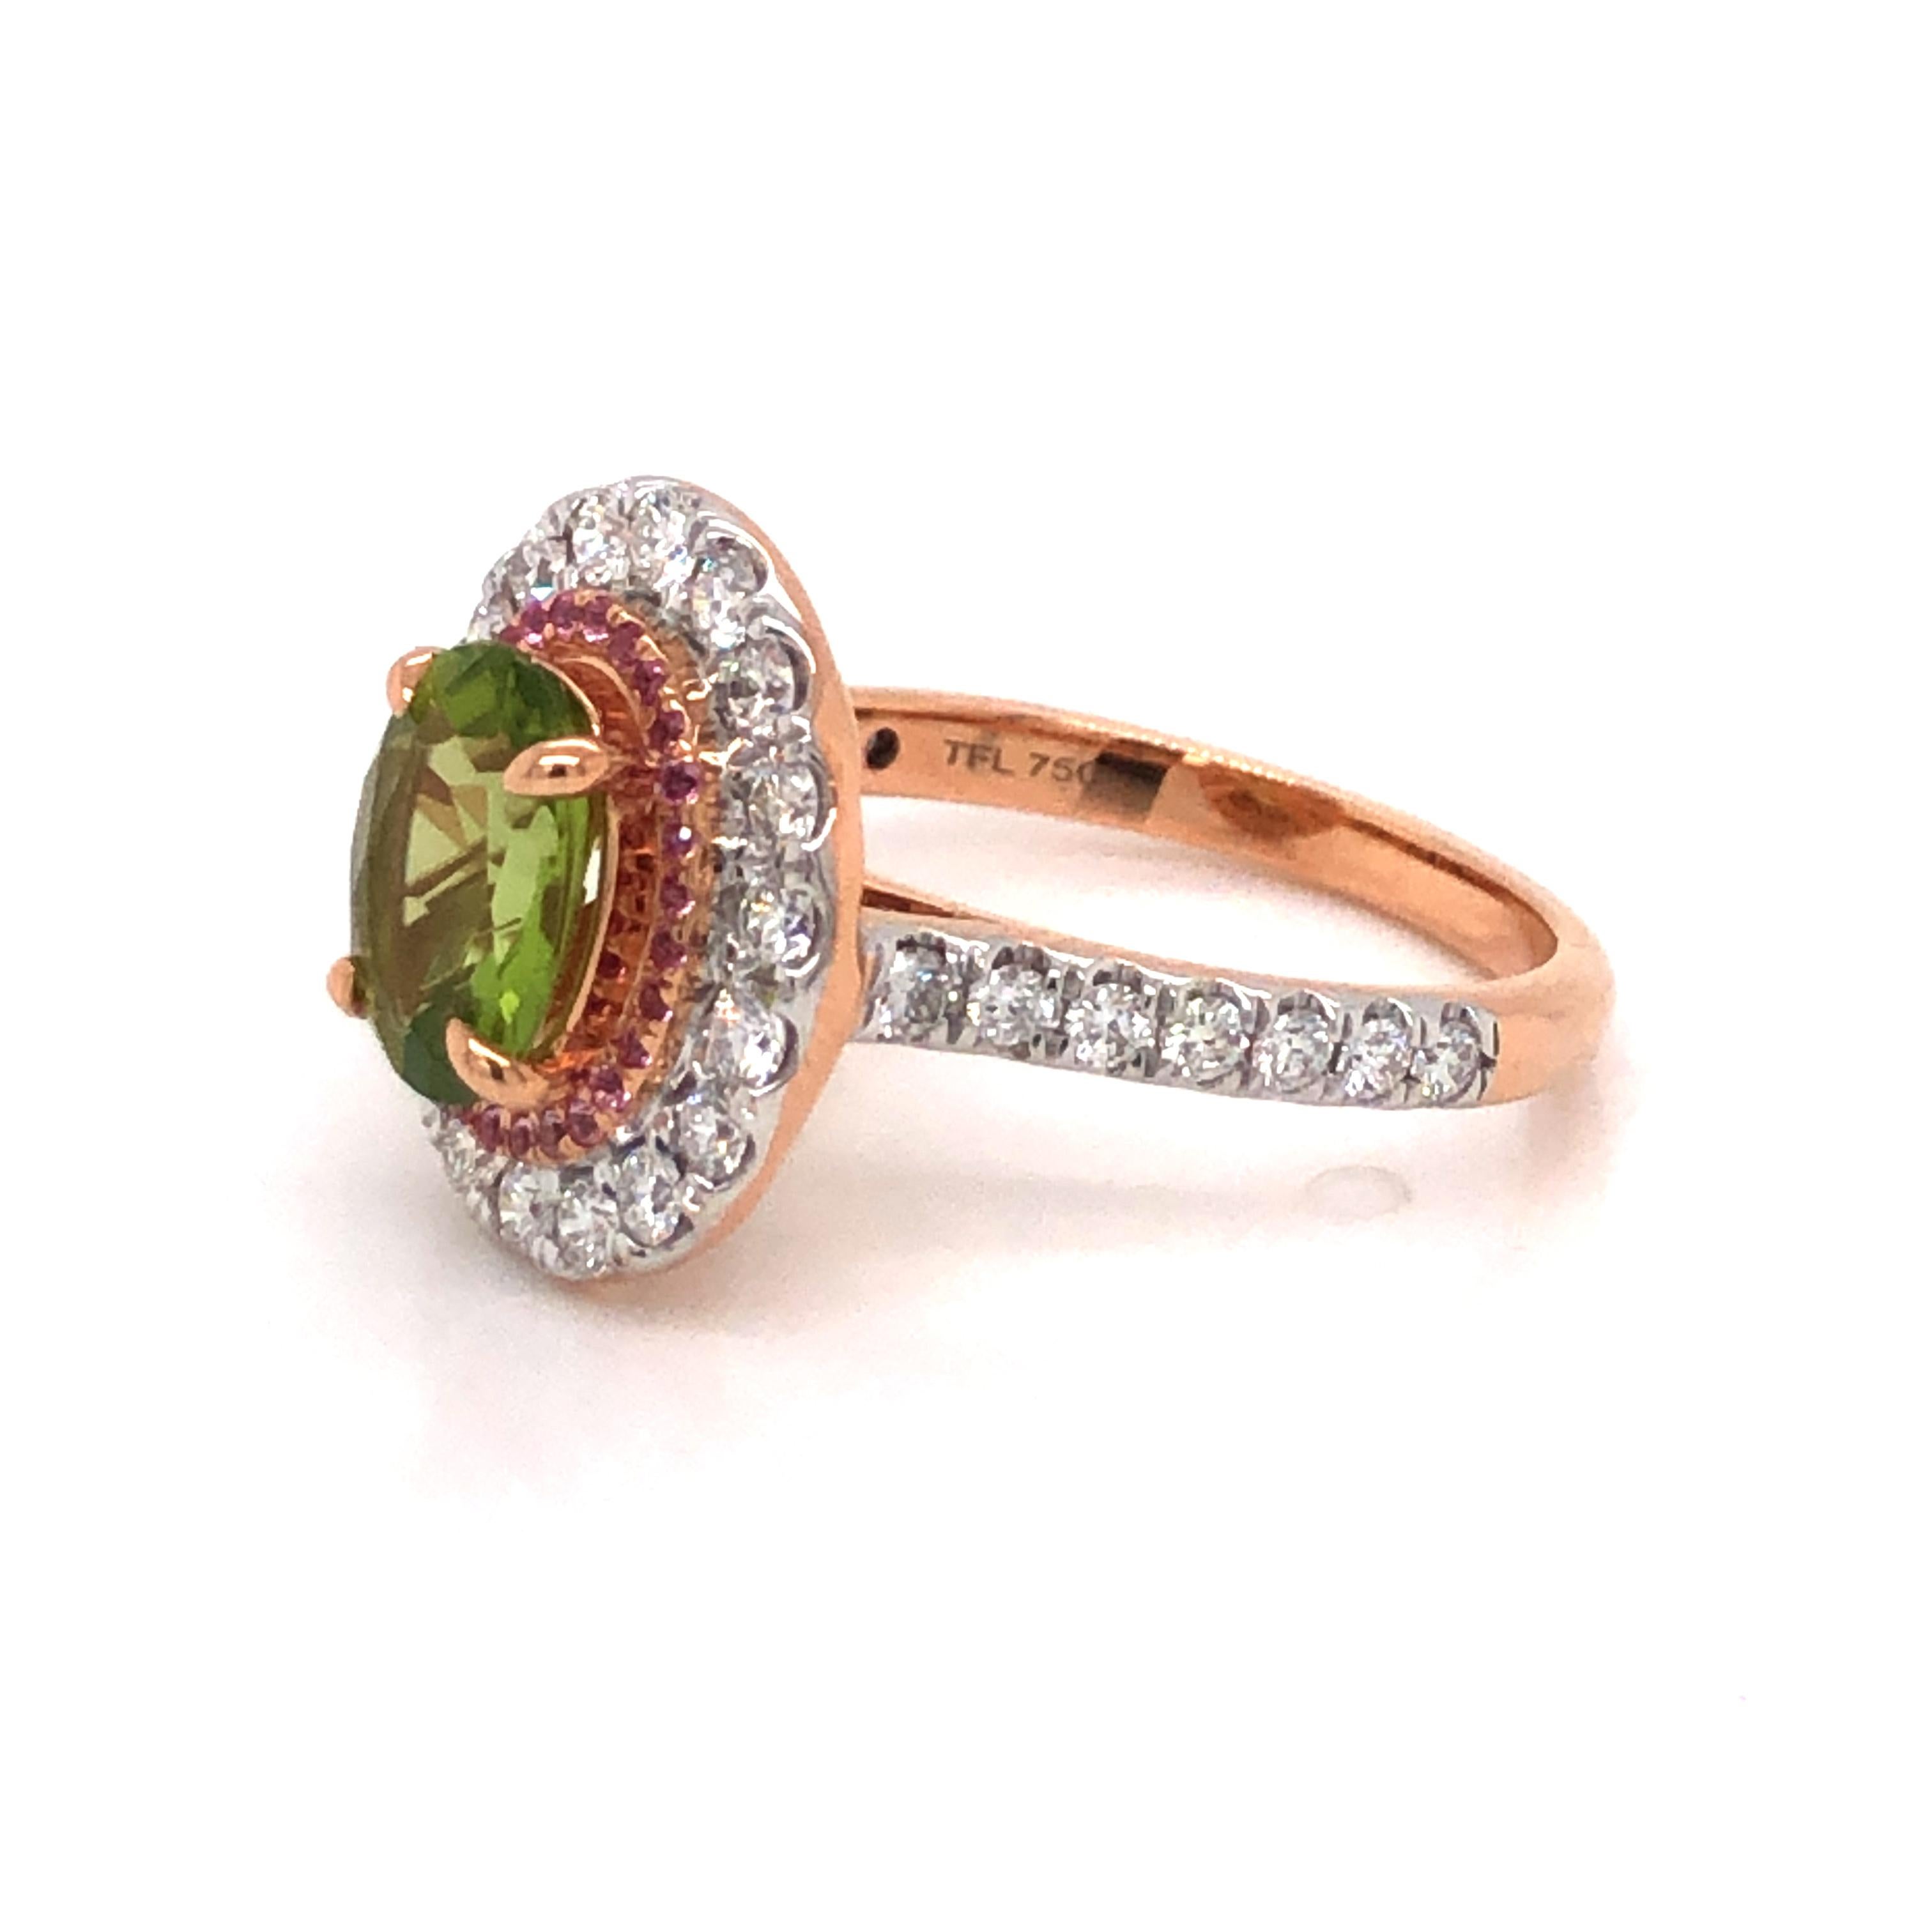 2.5 Carat Green Peridot Pink Sapphire Diamond Engagement Cocktail 18KT Ring For Sale 7